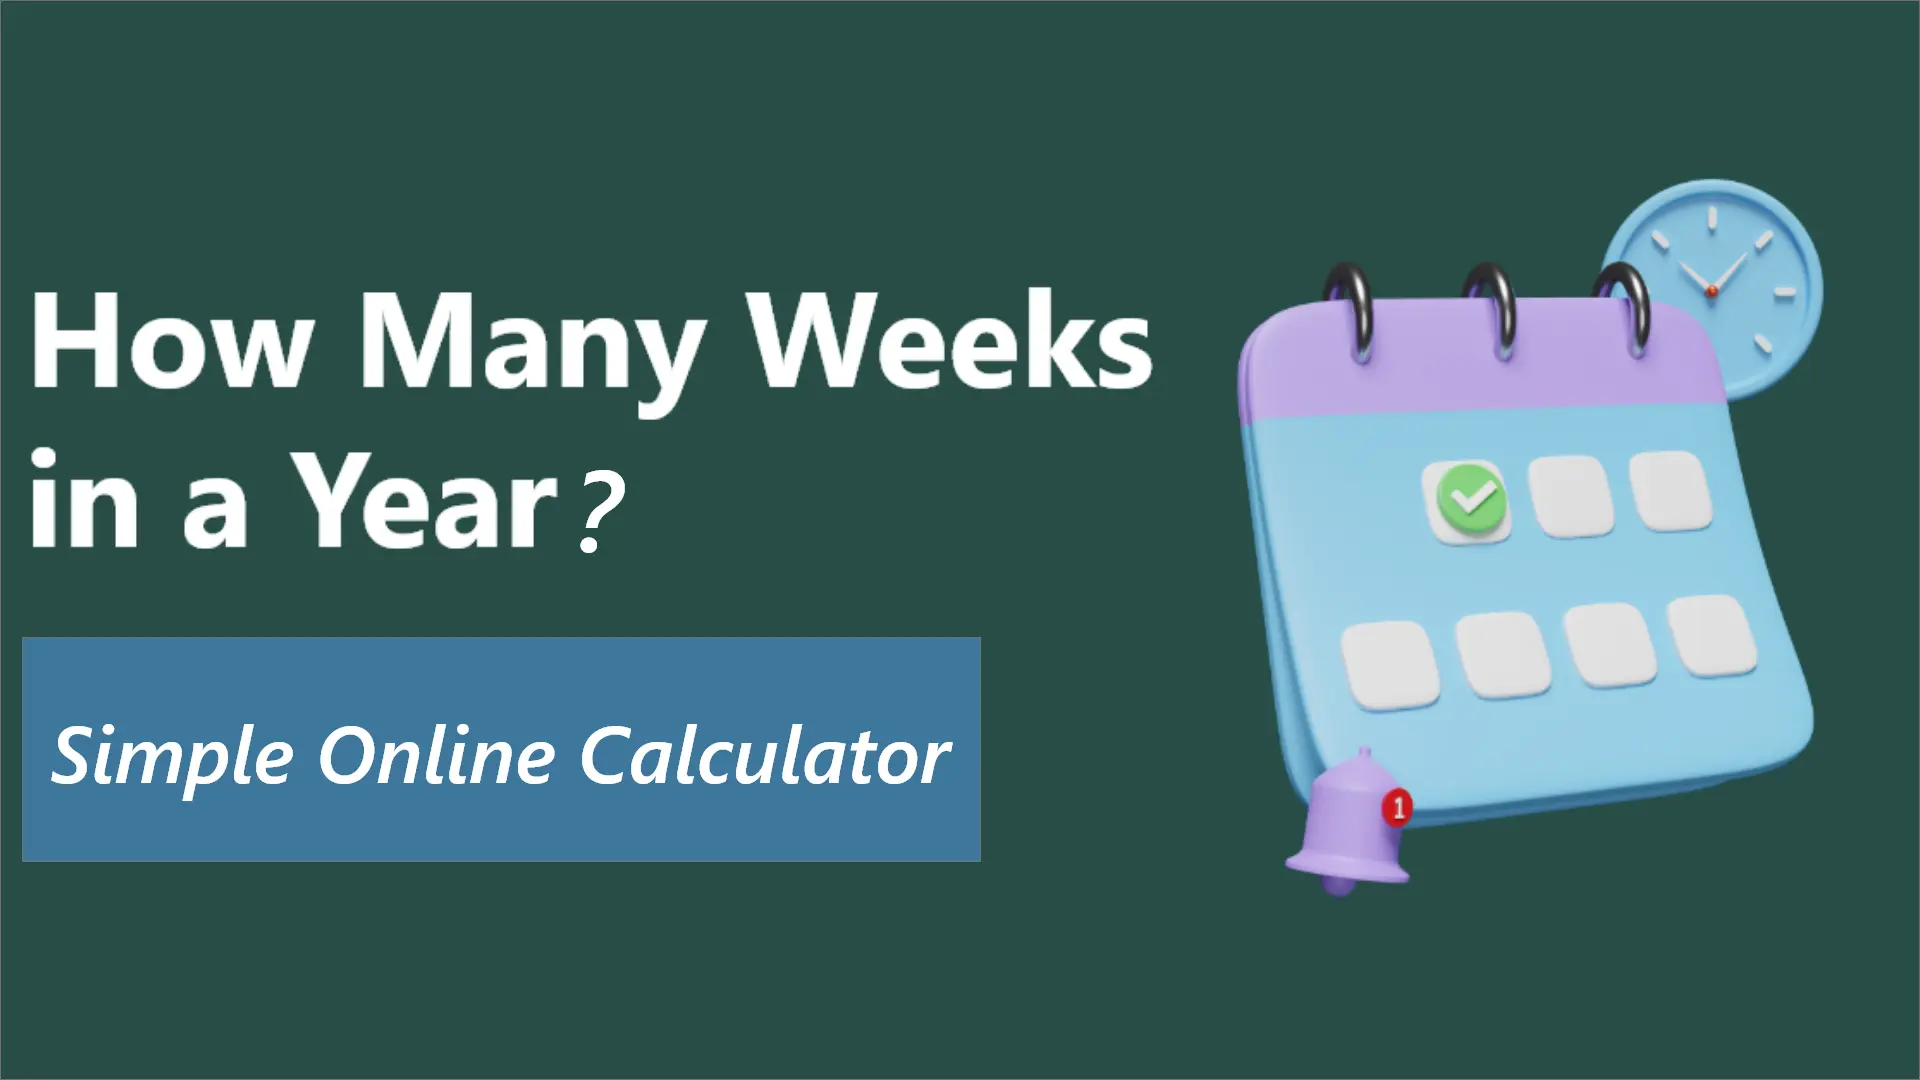 How Many Weeks in a Year? Simple Online Calculator Answers